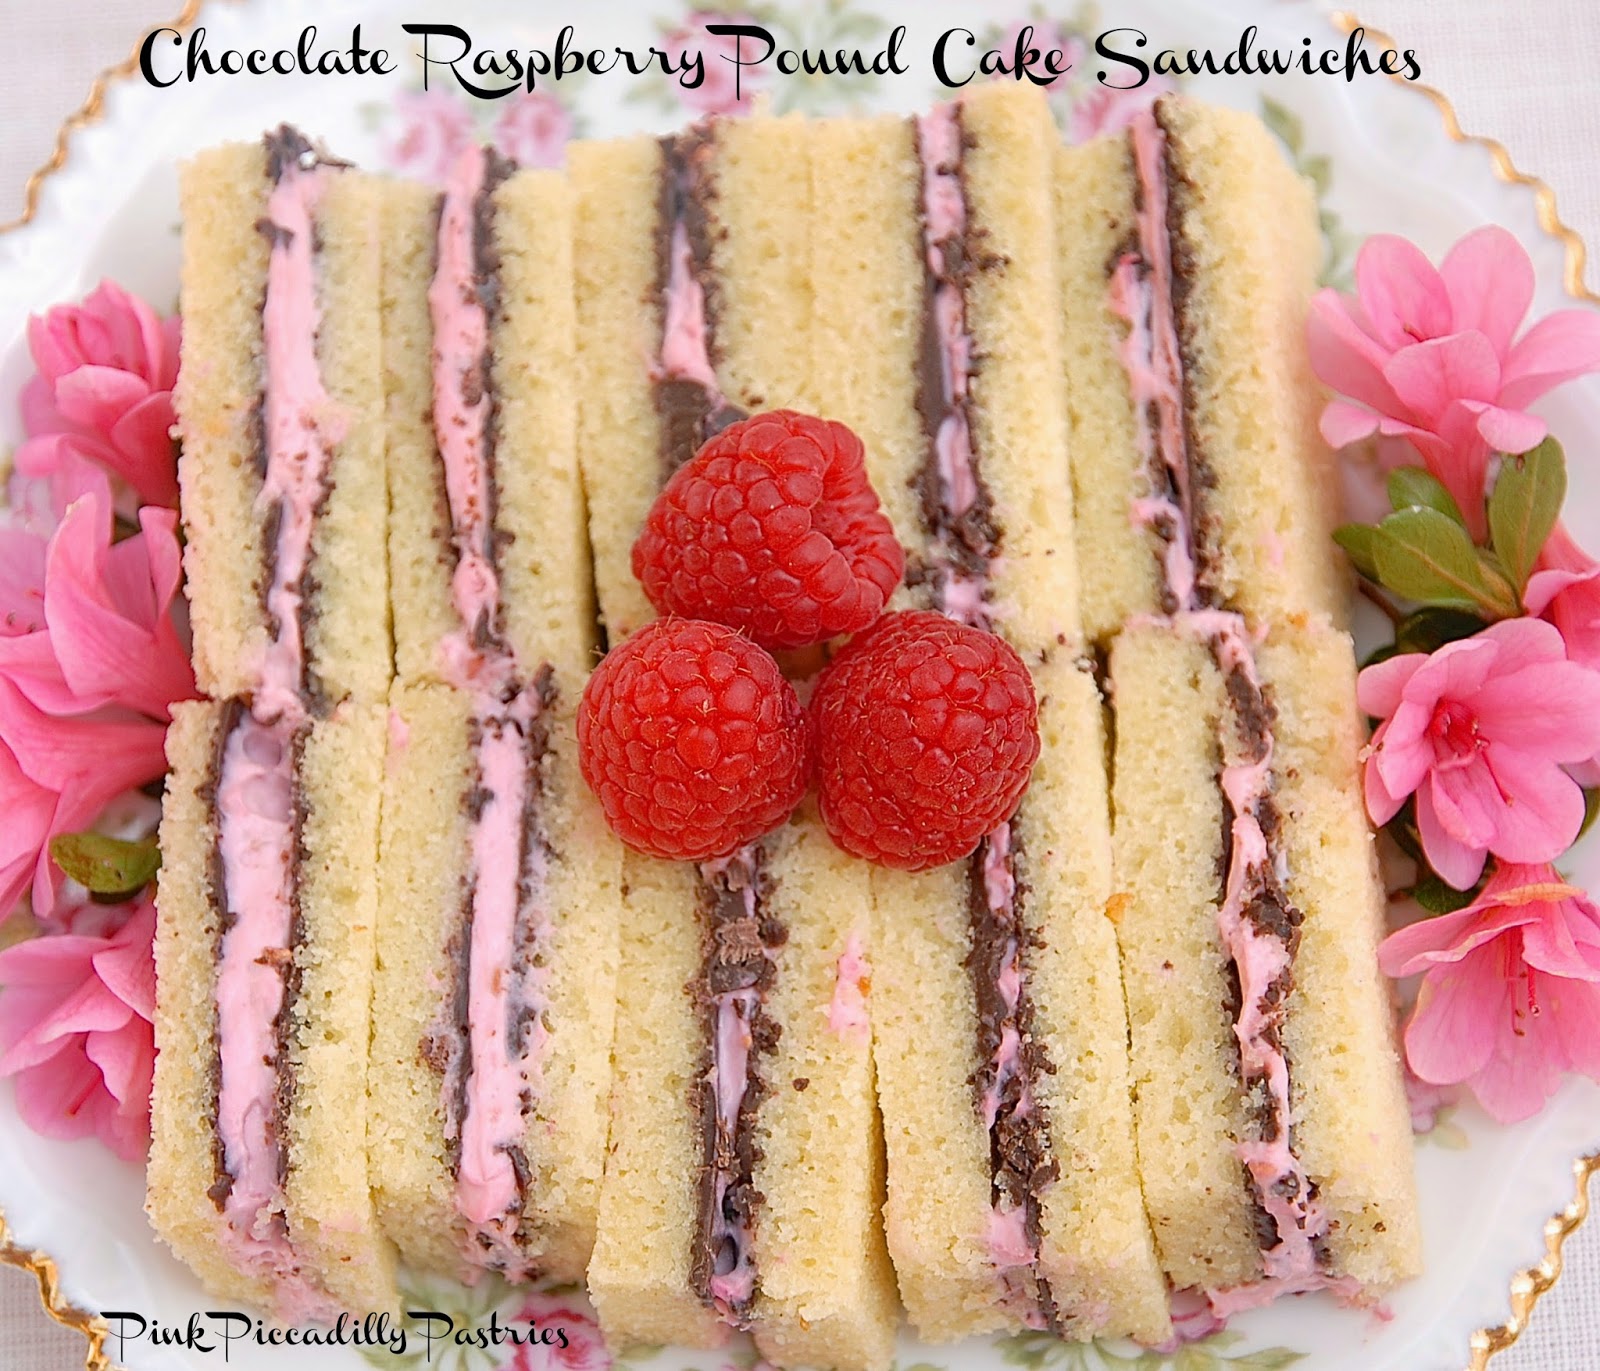 Pink Piccadilly Pastries: Chocolate Raspberry Pound Cake Tea Sandwiches